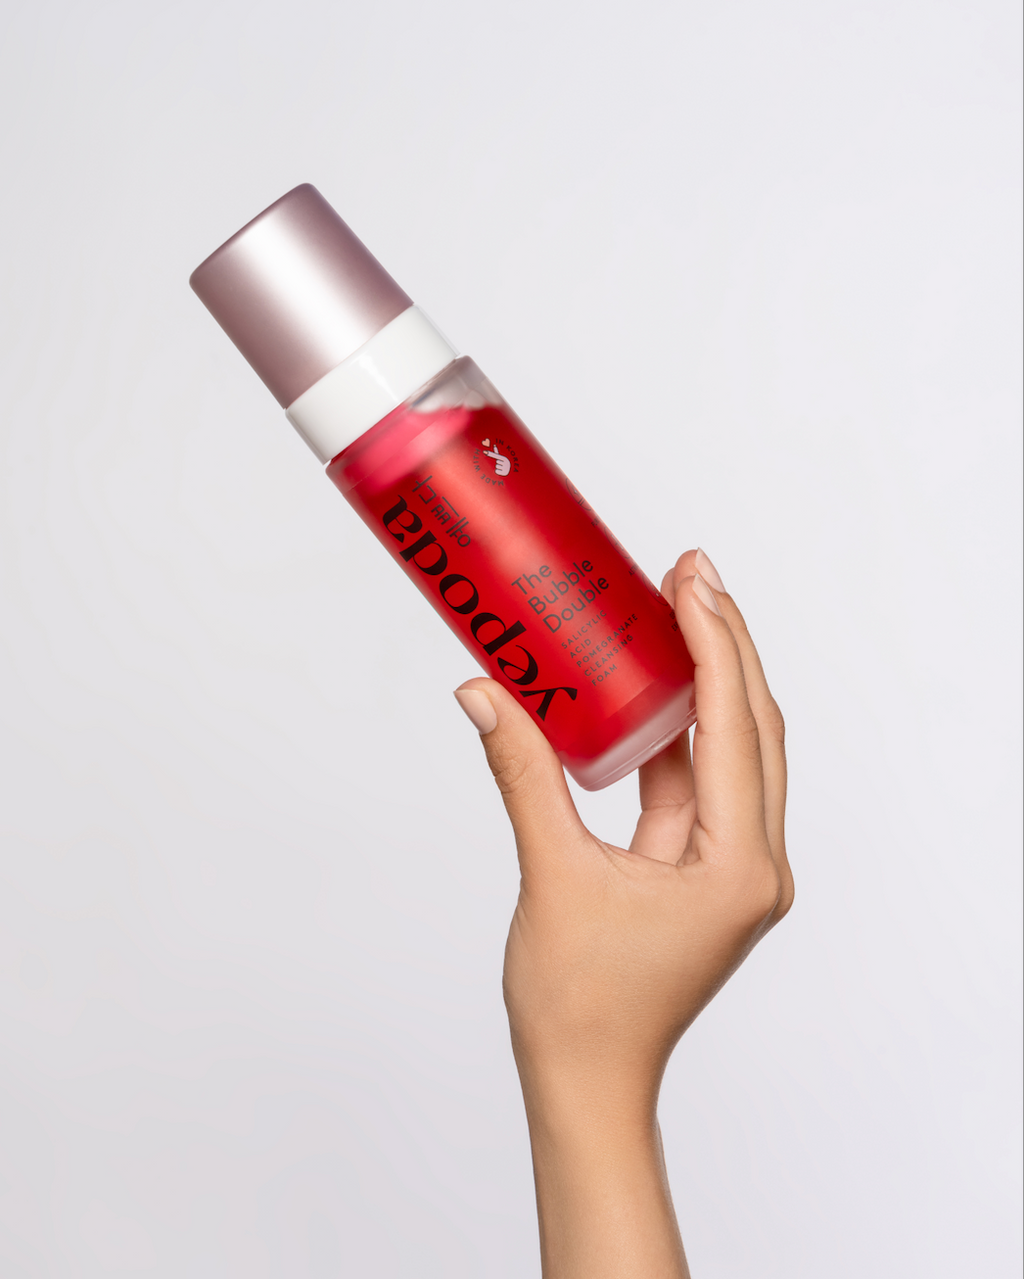 Let It Sit: Leave foam on skin for a minute to achieve a deeper pore cleansing.